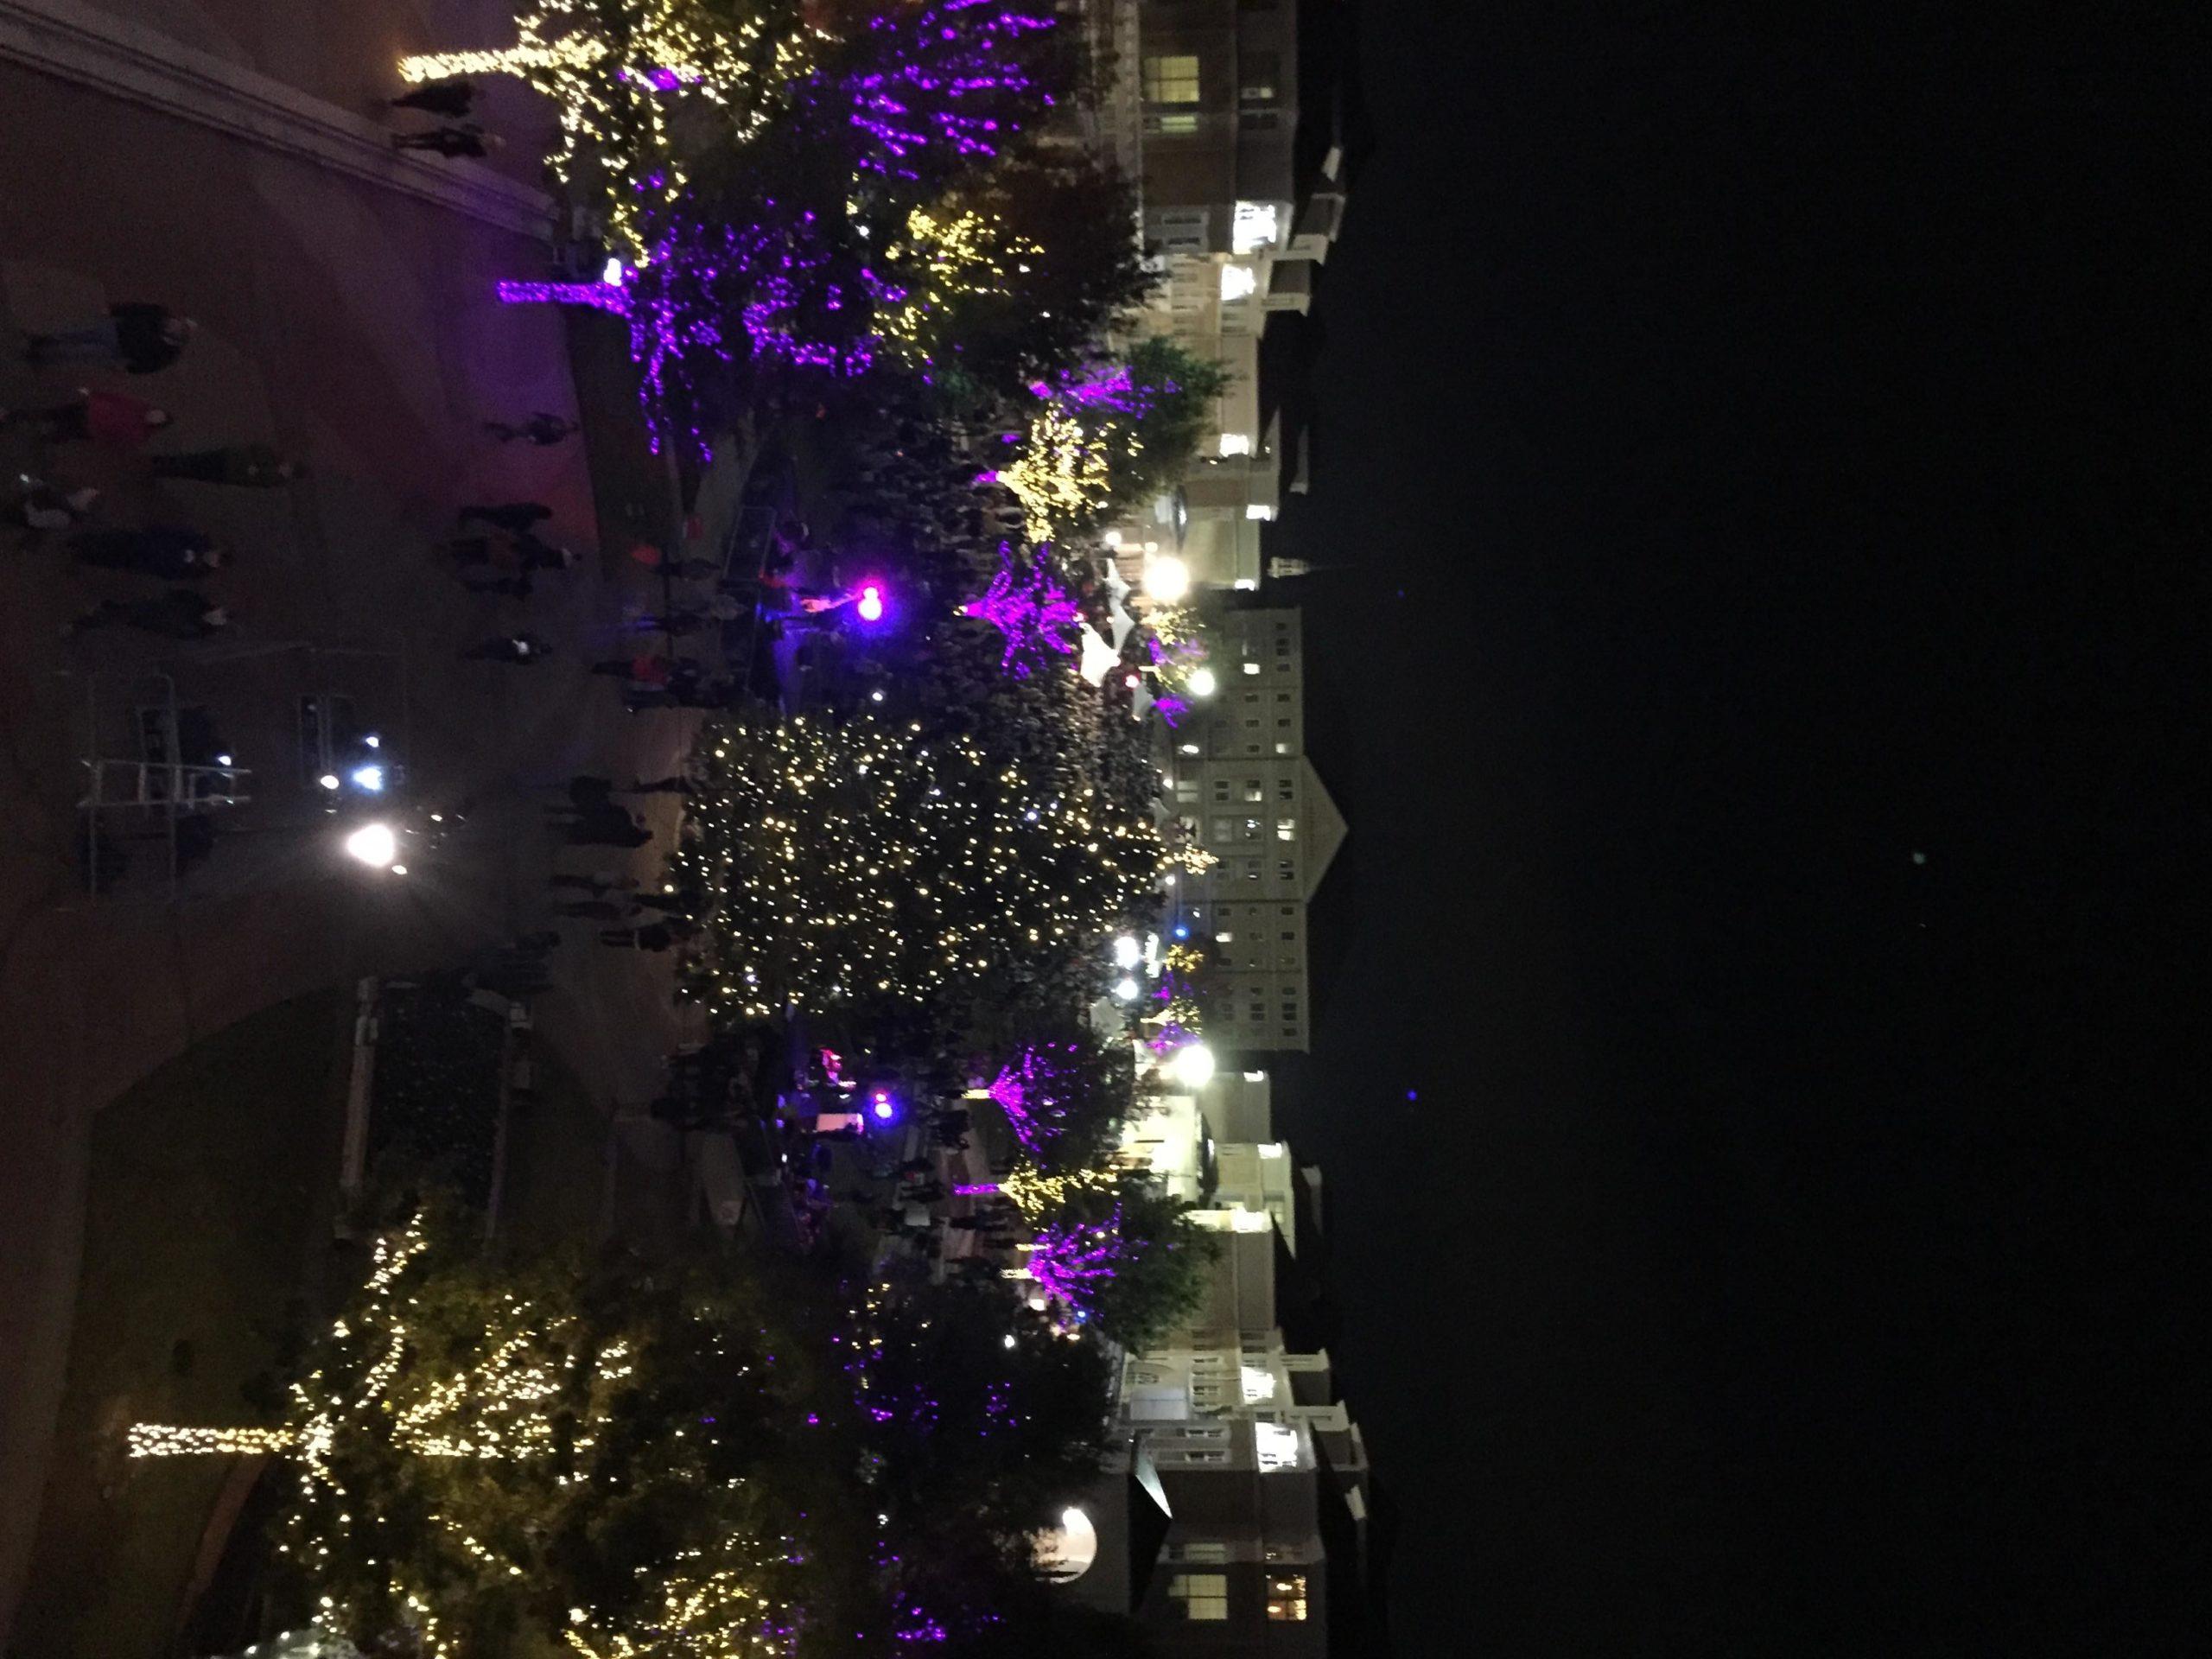 TCU+celebrated+the+beginning+of+the+holiday+season+by+lighting+a+43+foot+Christmas+tree.+